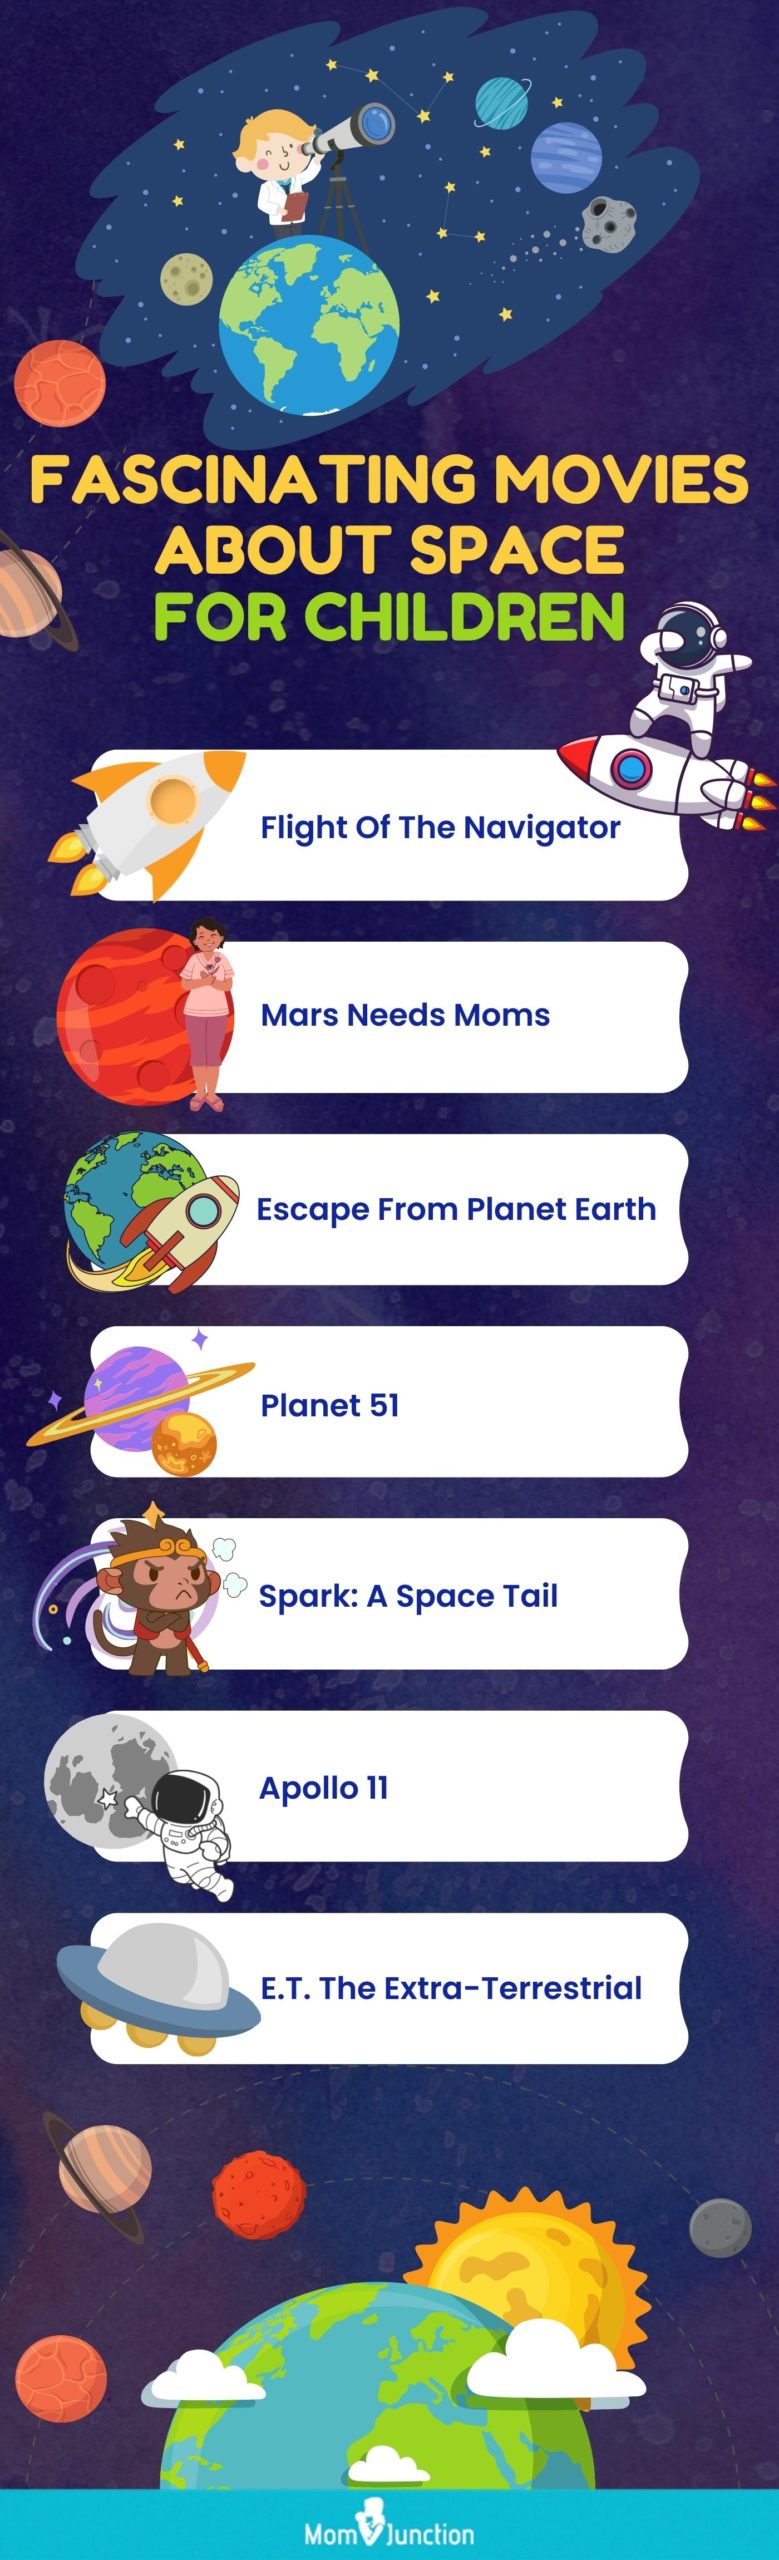 fascinating movies about space for children (infographic)